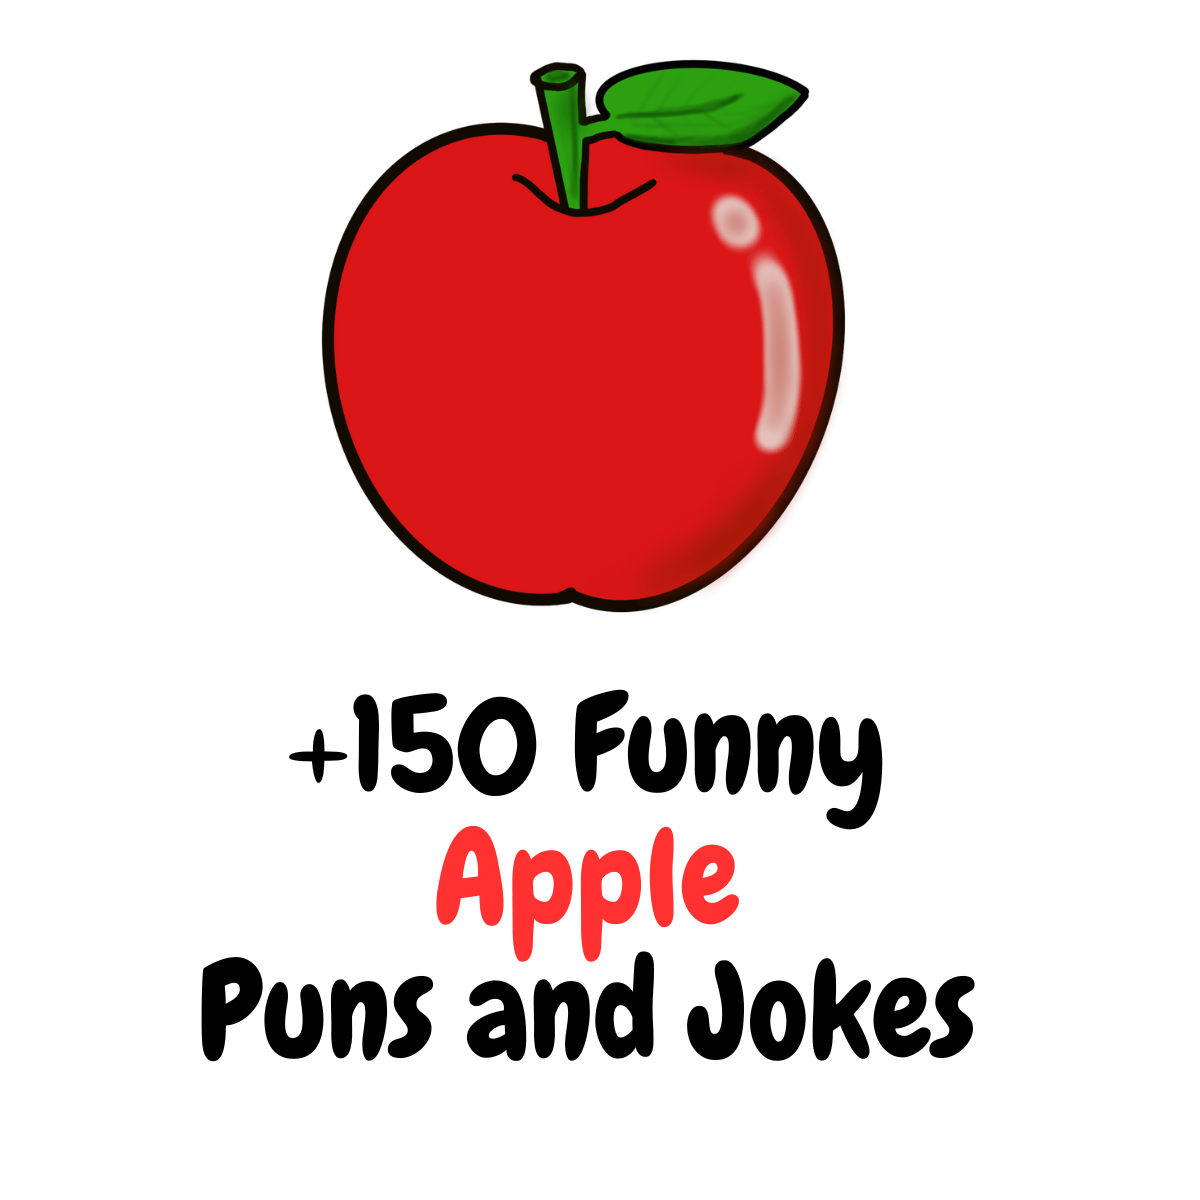 Apple Puns and Jokes: A Deliciously Funny Collection